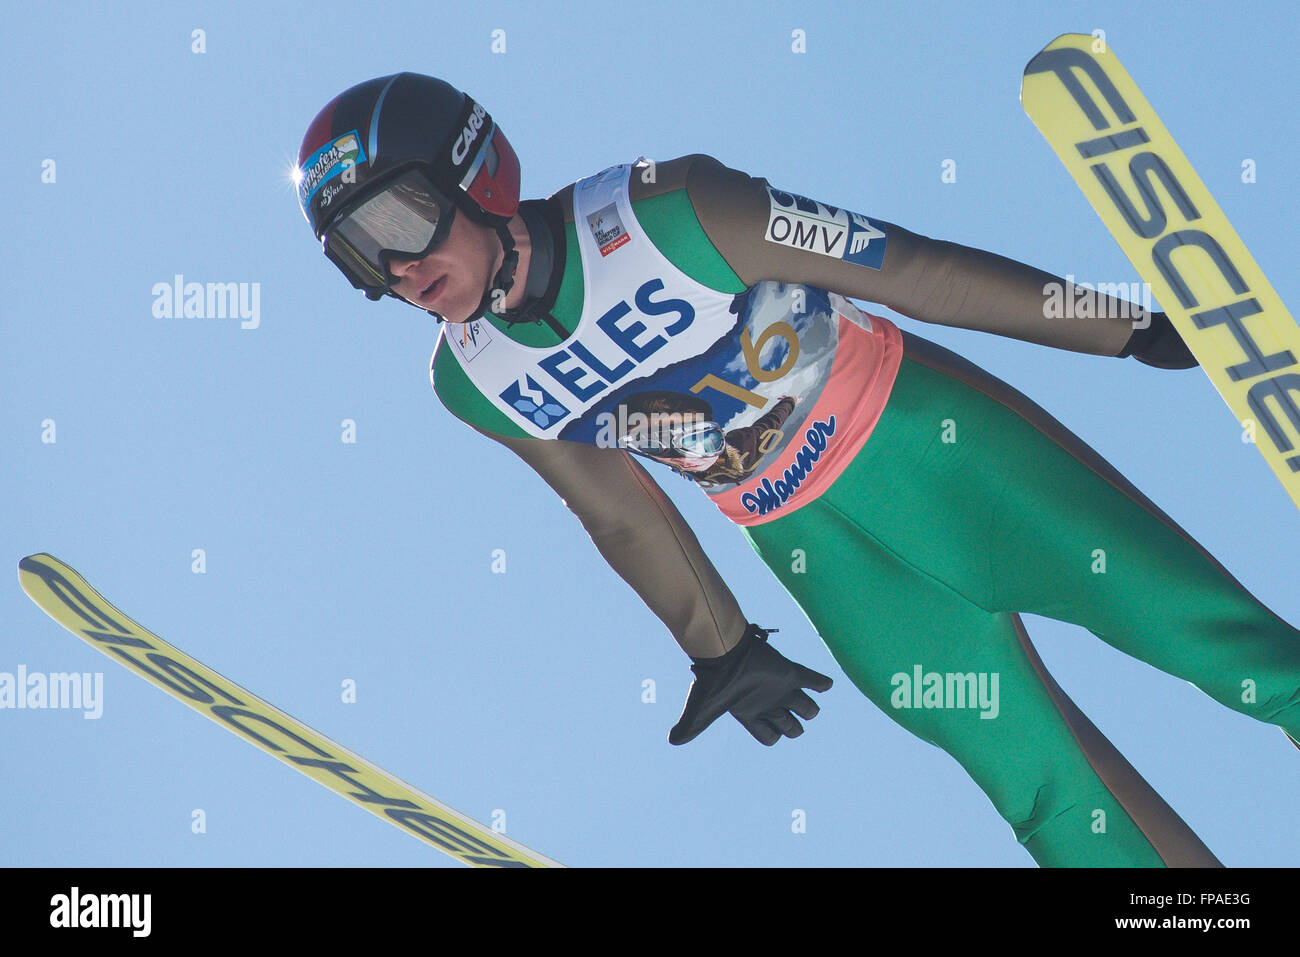 Planica, Slovenia. 18th Mar, 2016. Philipp Aschenwald of Austria competes during Planica FIS Ski Jumping World Cup finals on the March 18, 2016 in Planica, Slovenia. © Rok Rakun/Pacific Press/Alamy Live News Stock Photo